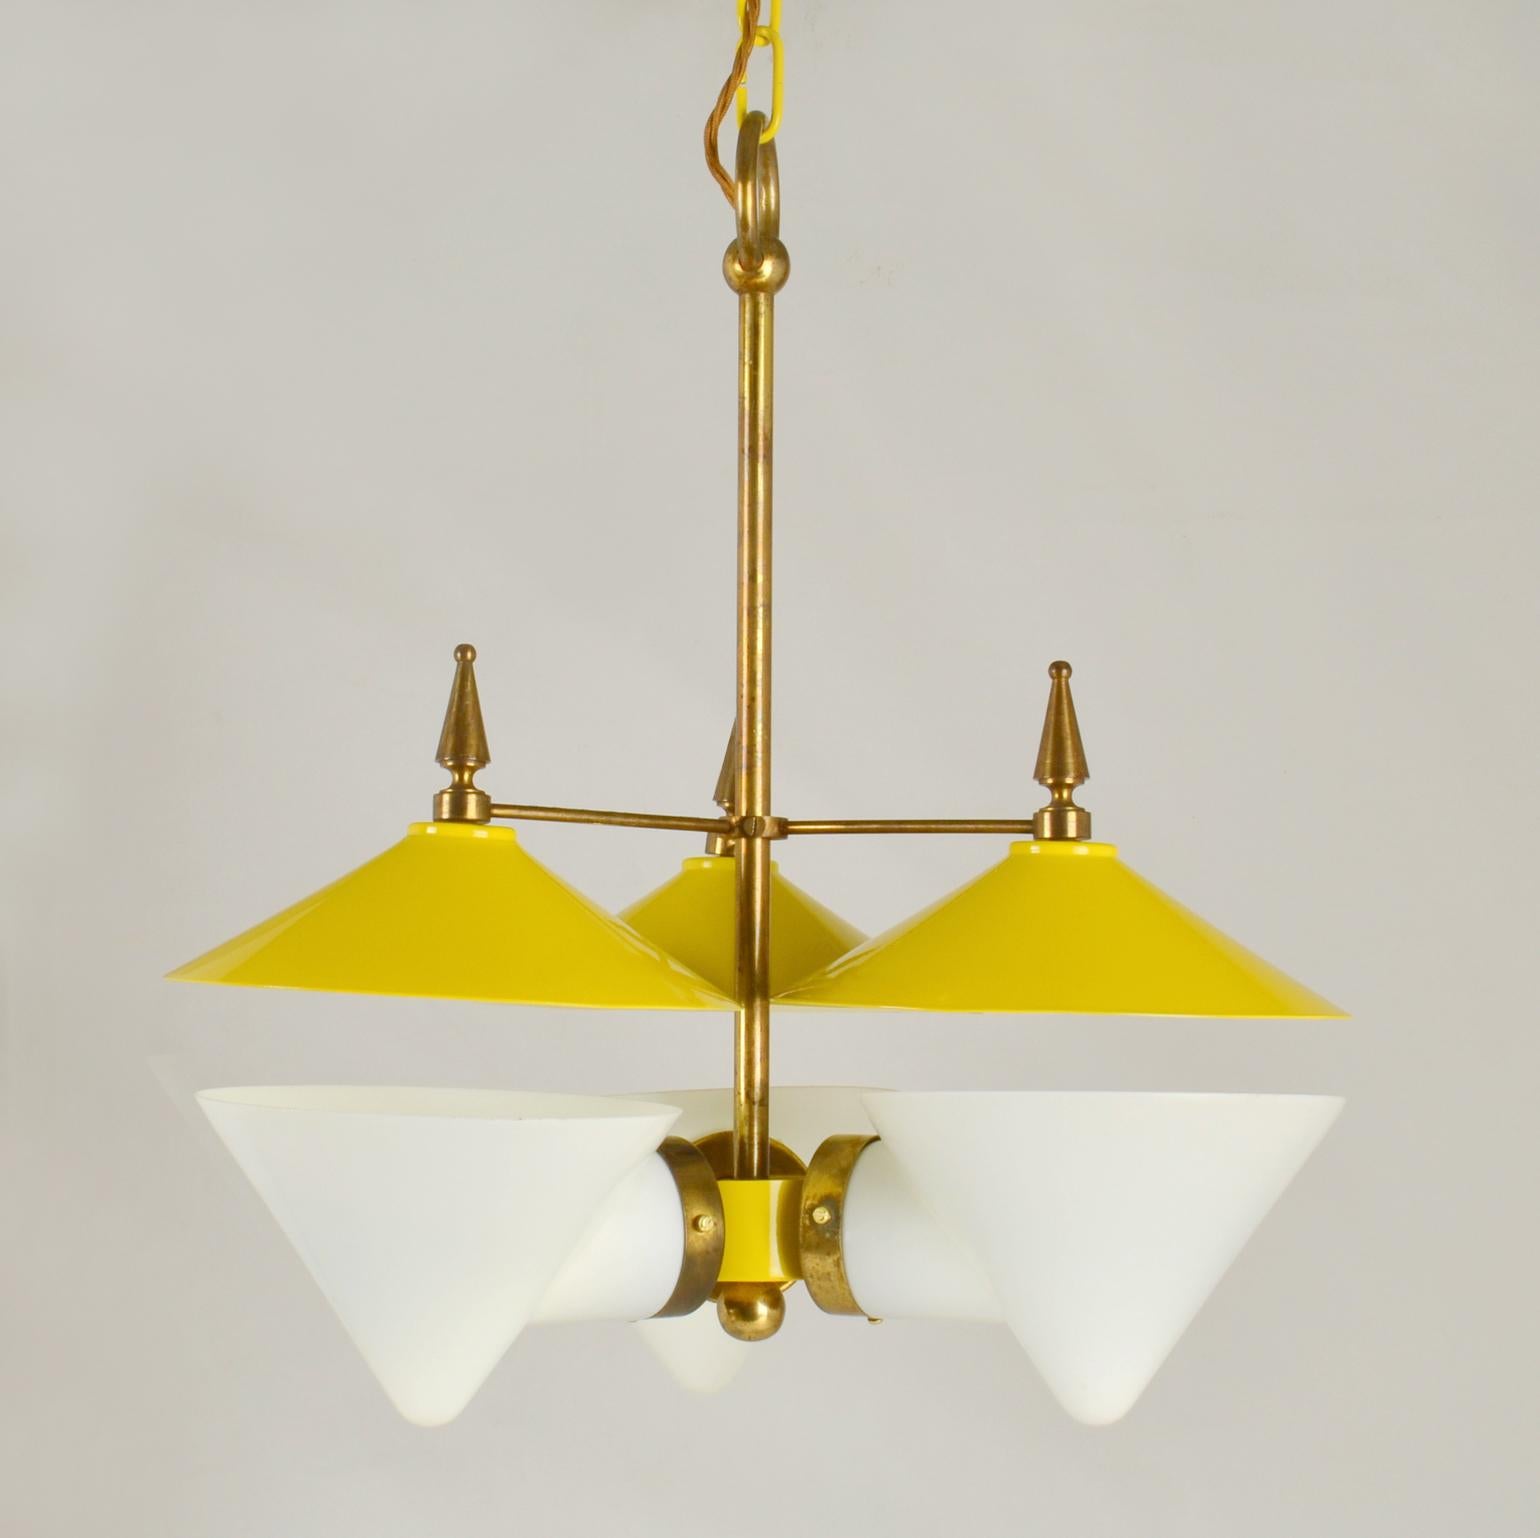 Extraordinary rare three arm 1950's French chandelier featuring a double conical shade made in two parts, the bottom part in opal glass and the cone shape reflector spun in lemon yellow enameled aluminum with brass details and fixtures is attributed